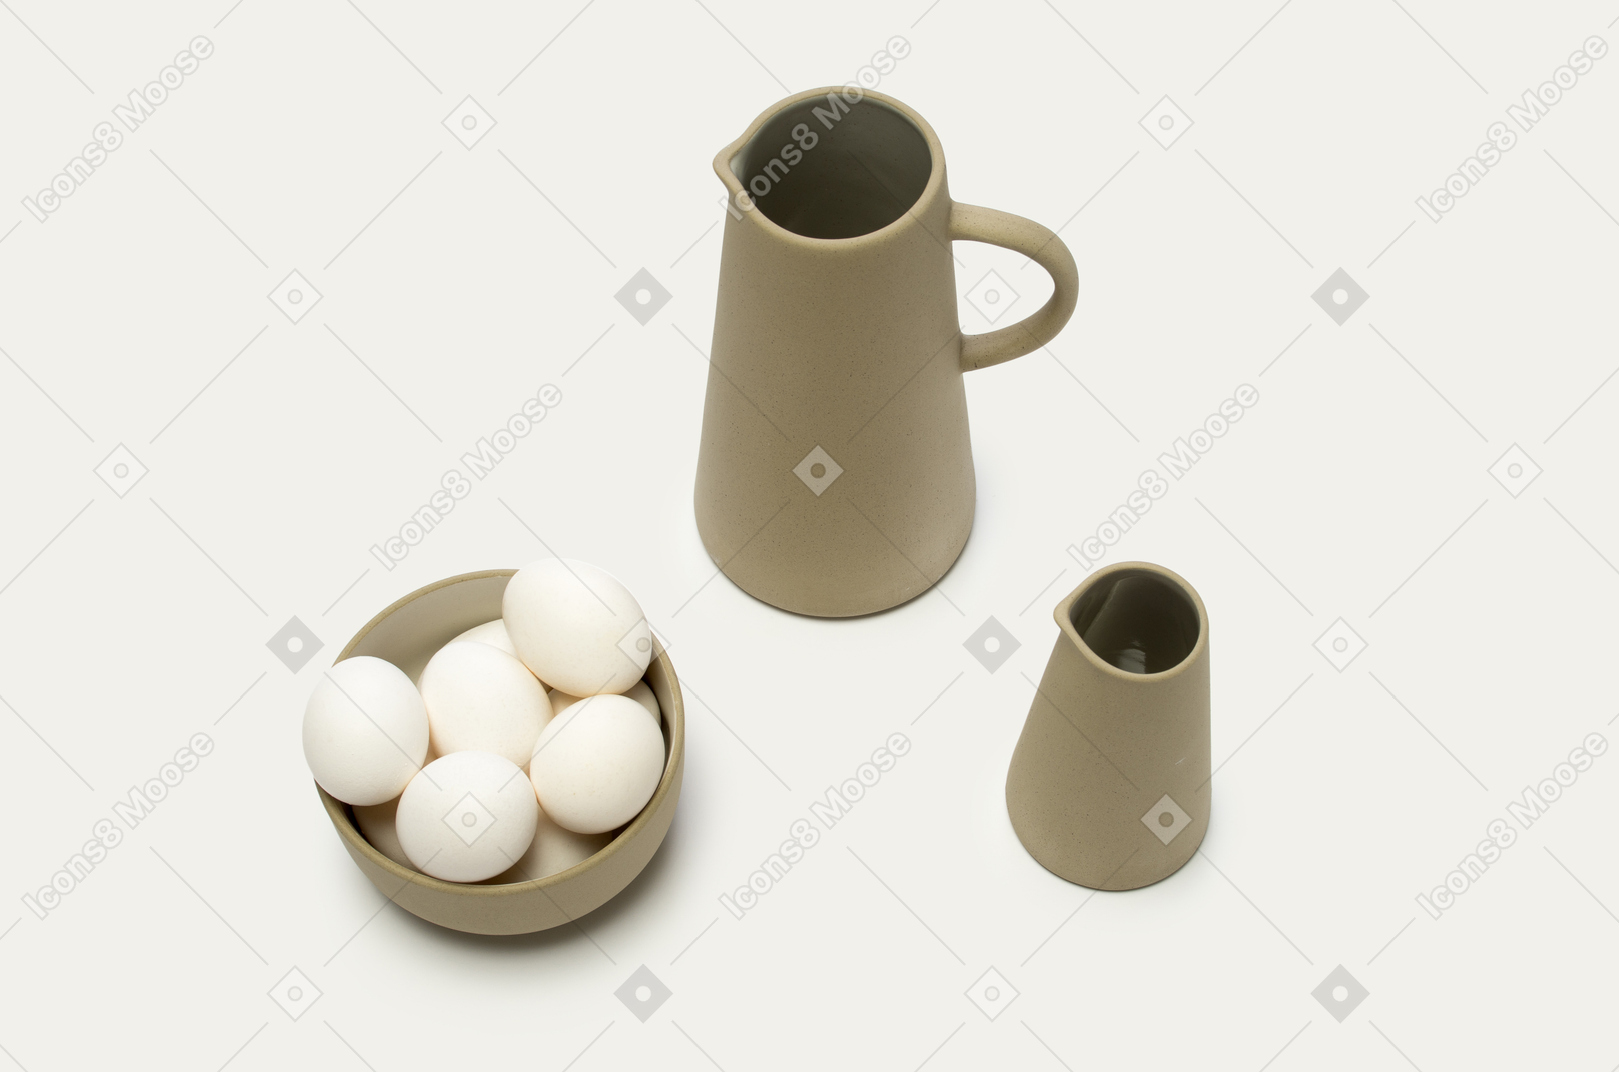 A bowl of eggs and some jars on a white background